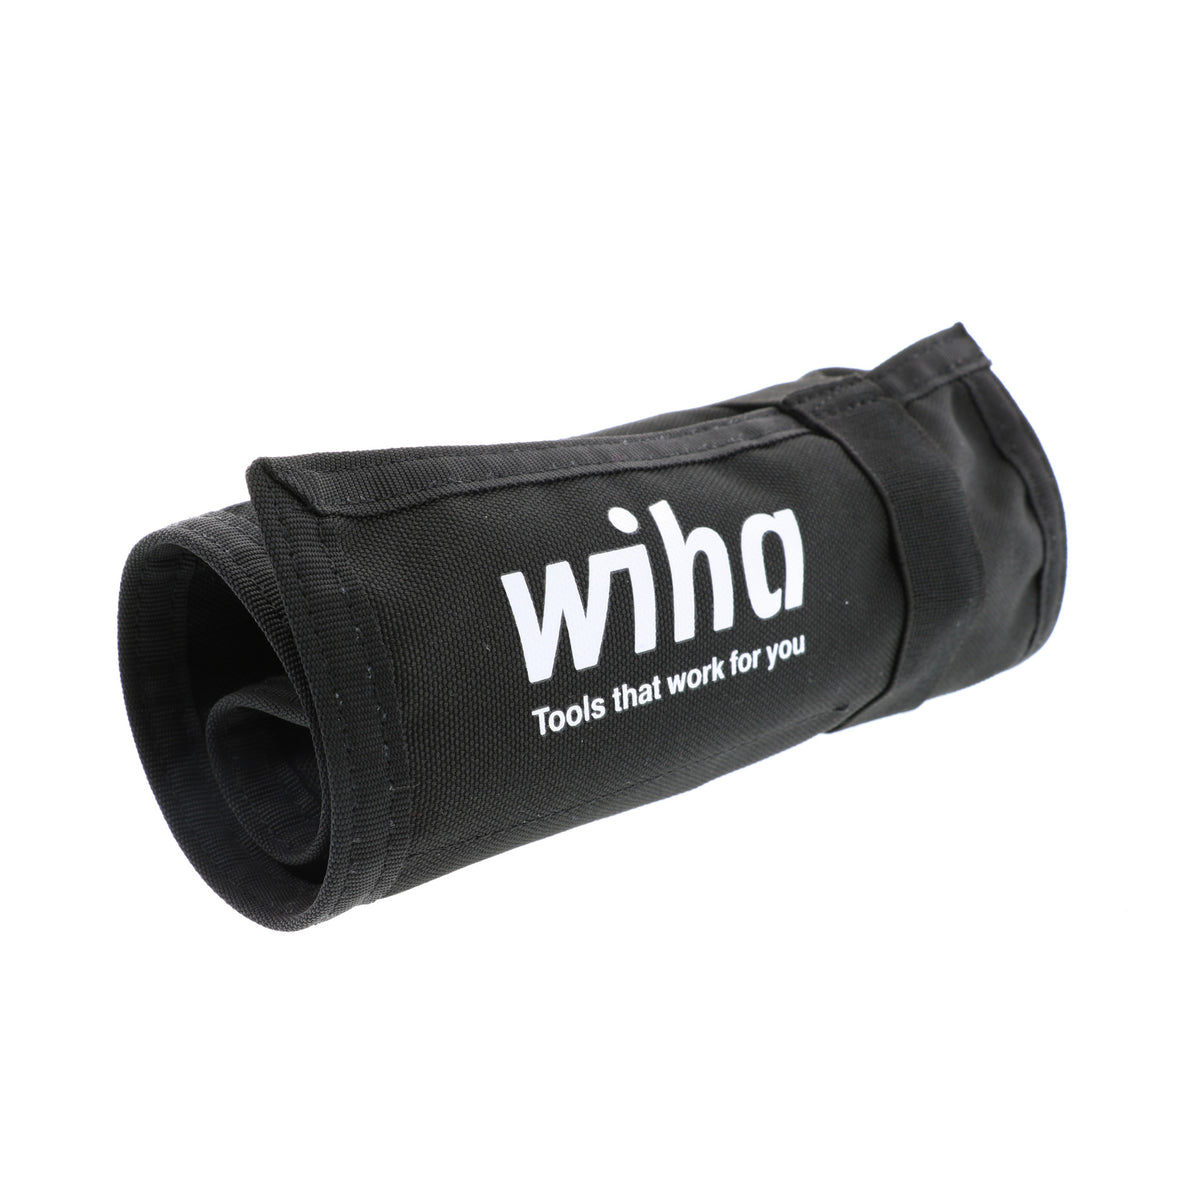 Wiha 91459 Roll-up Tool Pouch